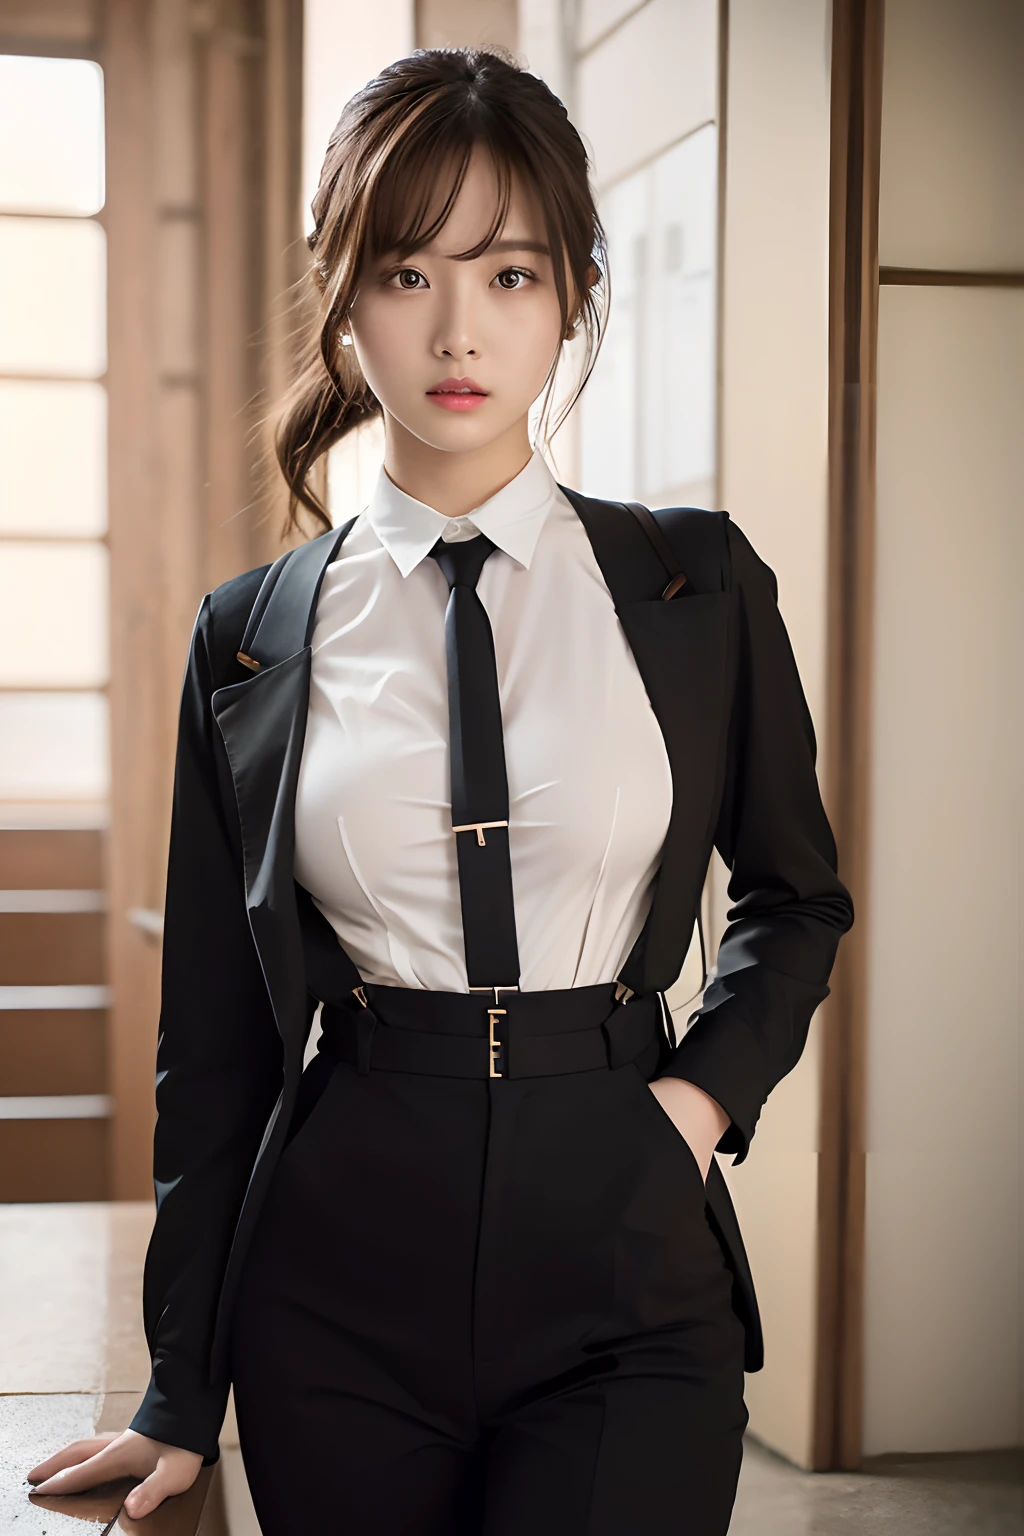 ​masterpiece、flat-colors、depth of fields、lens flare 1 girl、、Brown hair、watching at viewers　　　black suspenders　　　large full breasts　　　 　 Armpit sweat　perspiring　Side of both hands　　walls: 　Black pants, Black jacket holster　Leg holster　　　　Gaze　　　Small face　bangss　suits　Cutter shirt